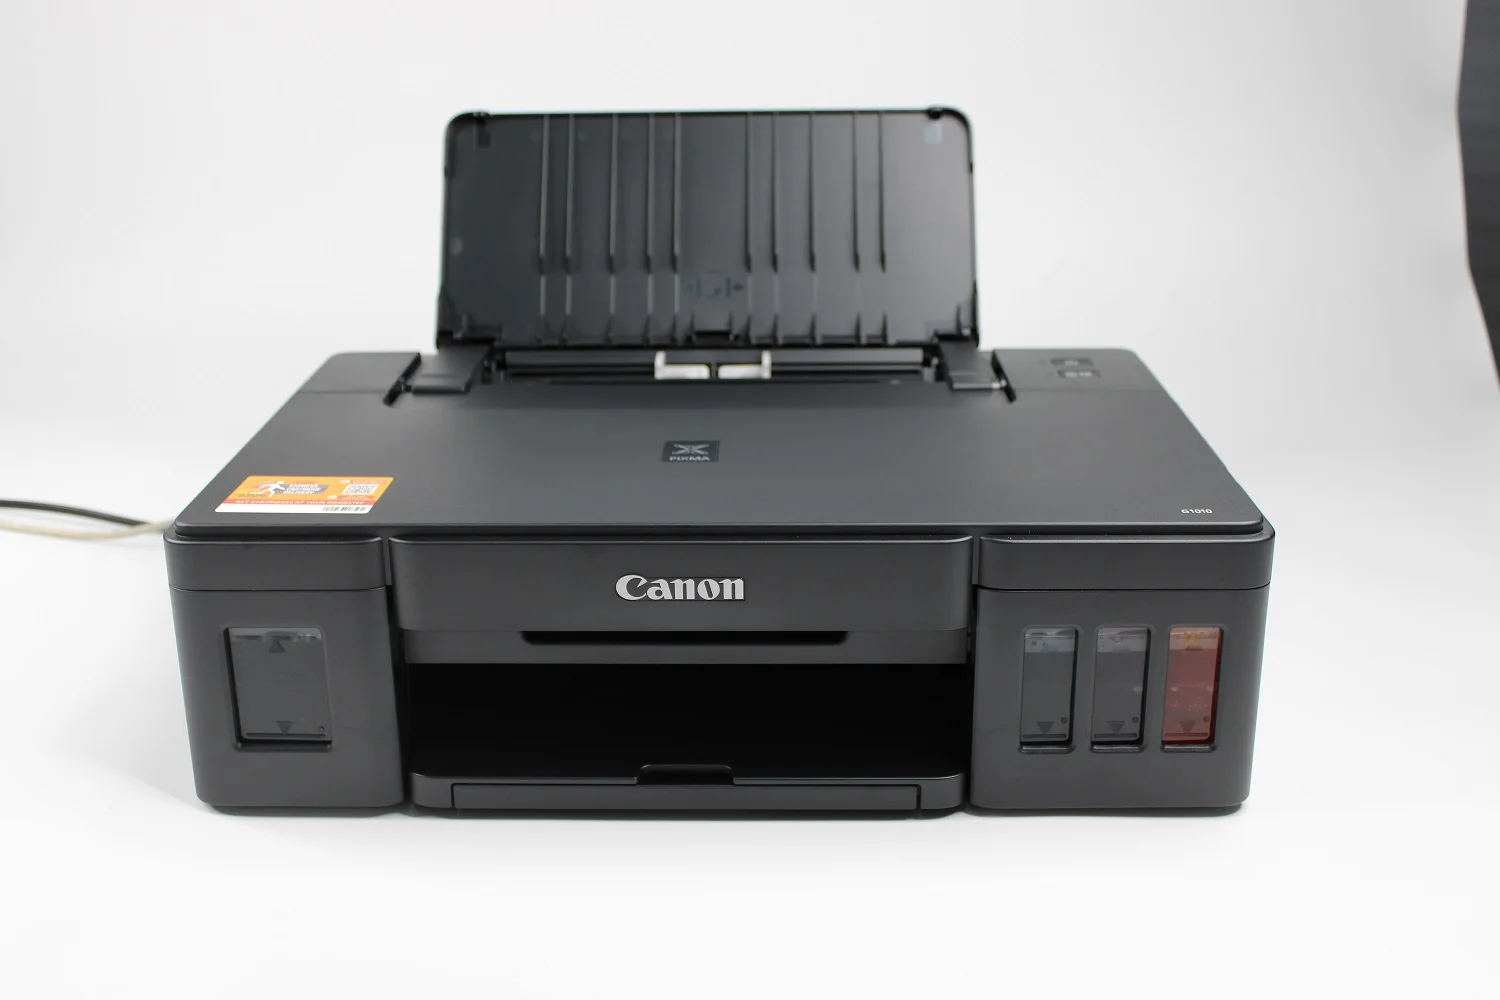 Canon G1010 Pvc Id Card Printer Without Tray Buy Canon Printer High Quality Id Card Priner Plastic Card Printer Product On Alibaba Com